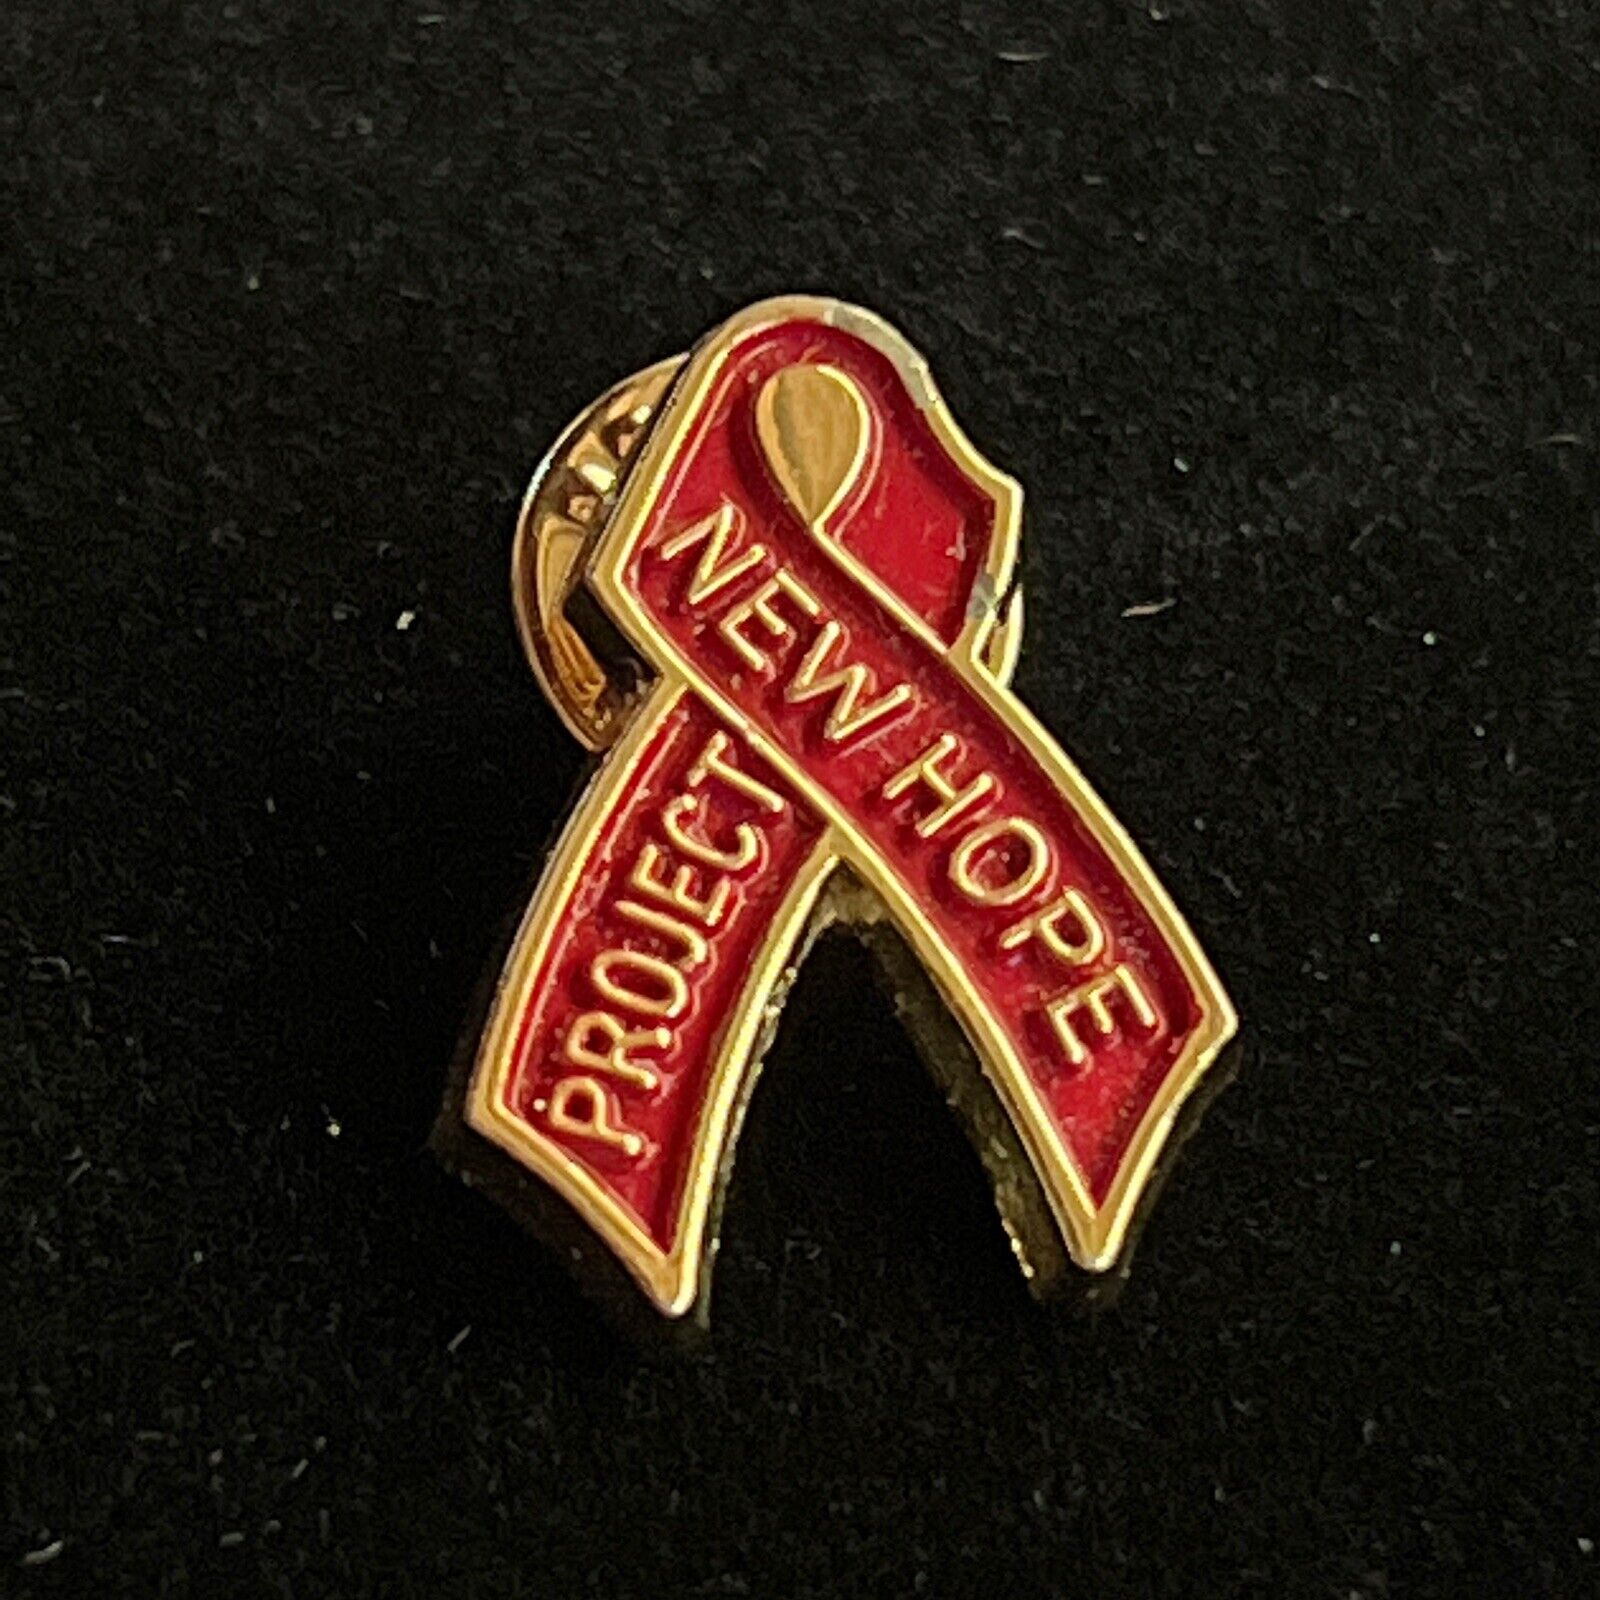 HIV AIDS Project New Hope Awareness Red Ribbon Lapel Pin